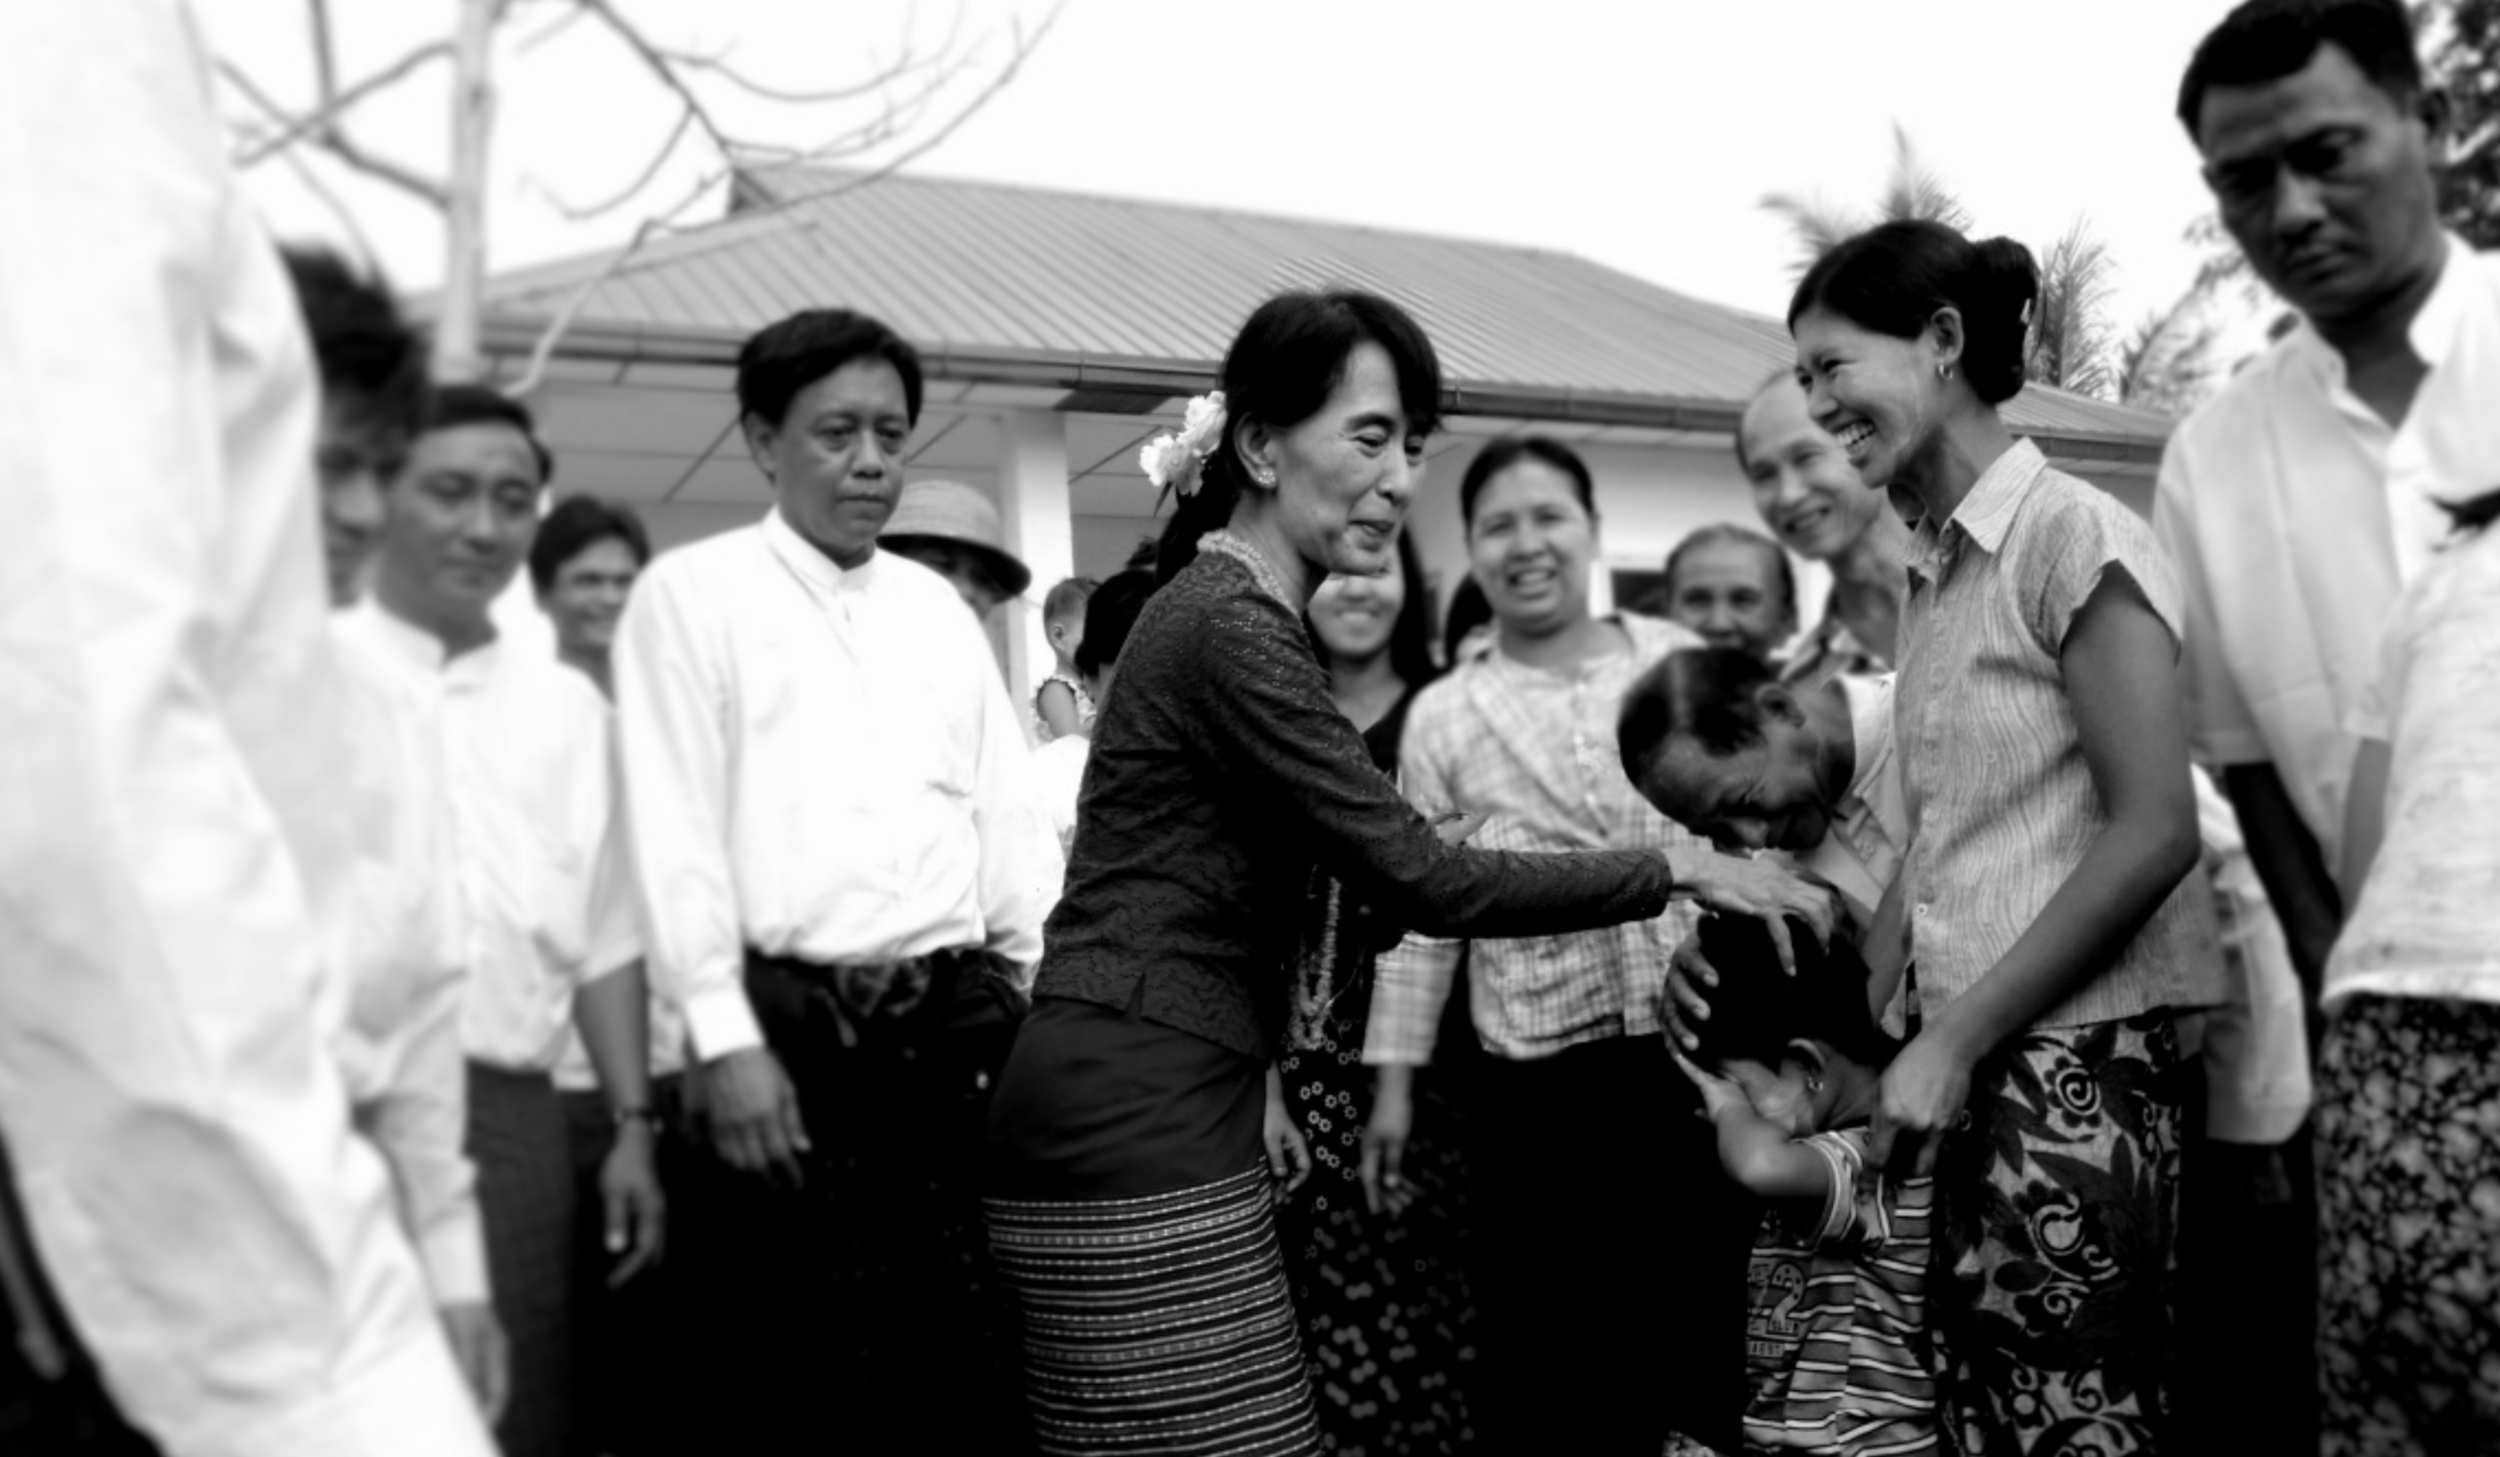  In keeping with her image as a savior – most people will only refer to her as “Mother Suu” – Suu Kyi chose Burma’s most impoverished constituency, Kawhmu, to contest the 2012 elections. One of the regions worst affected by Cyclone Nargis in 2008, Ka